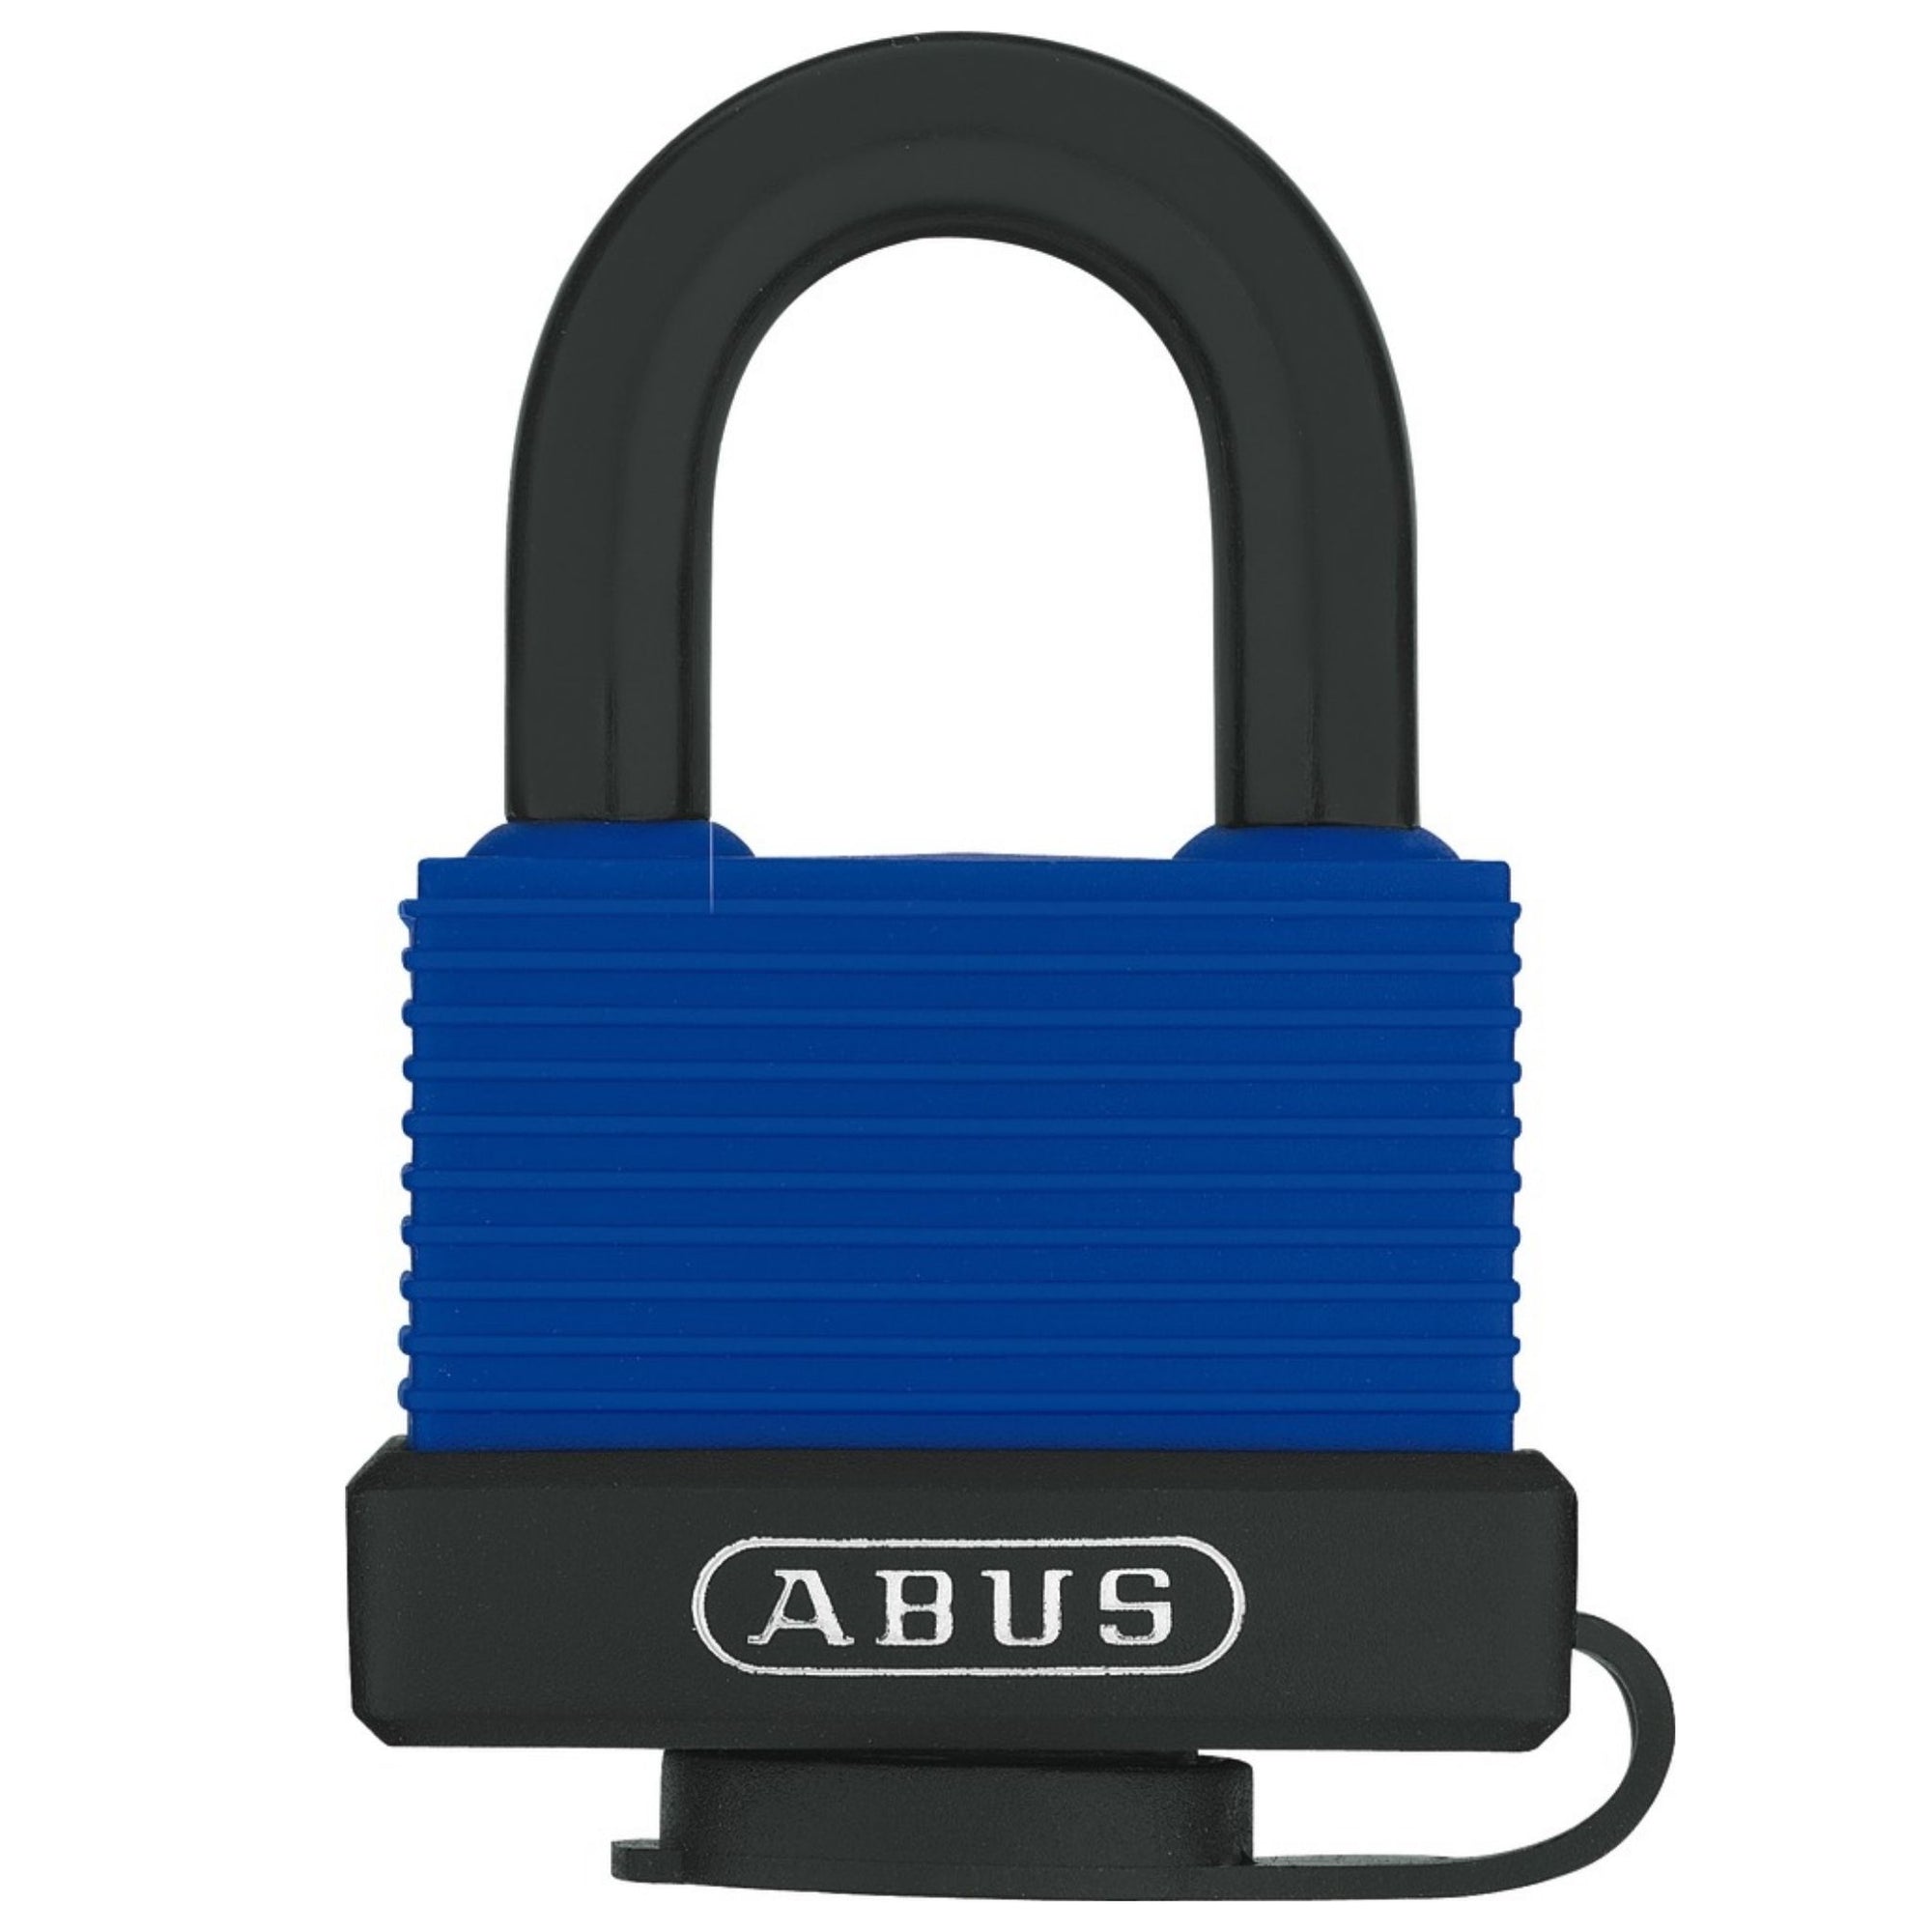 Abus 70IB/45 MK 65402 Weatherproof Brass Padlock with Stainless Steel Shackle Master Keyed to Match Existing Master Key System MK65402 - The Lock Source